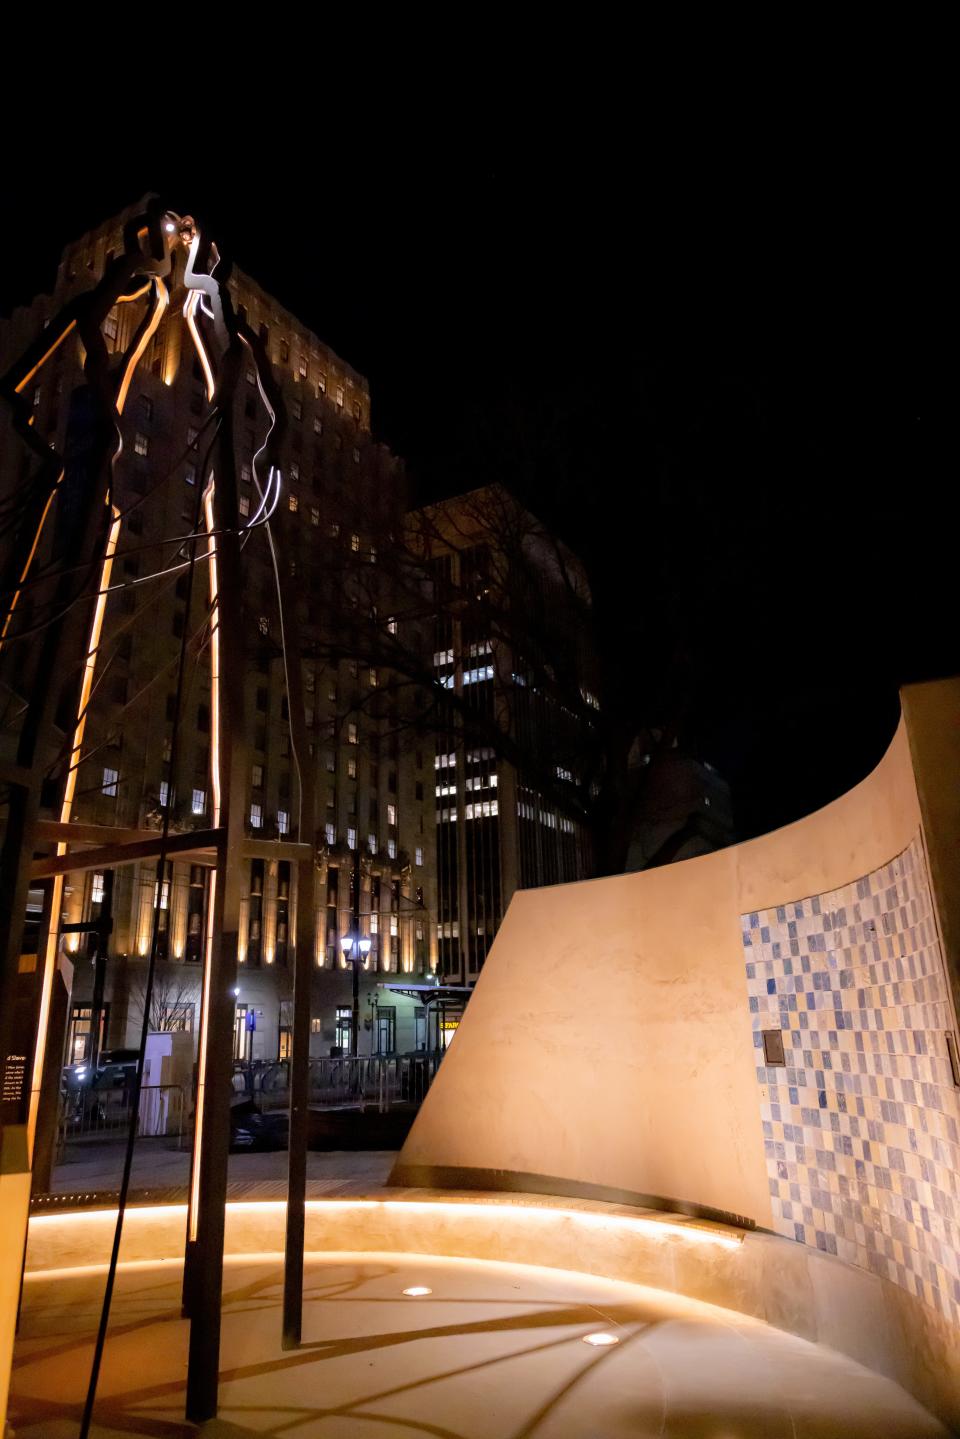 A Harriet Tubman monument, "Shadow of a Face," in Harriet Tubman Square in Newark, is a towering wood and metal construction, with an image of the famous underground railroad conductor on its round, winding base.